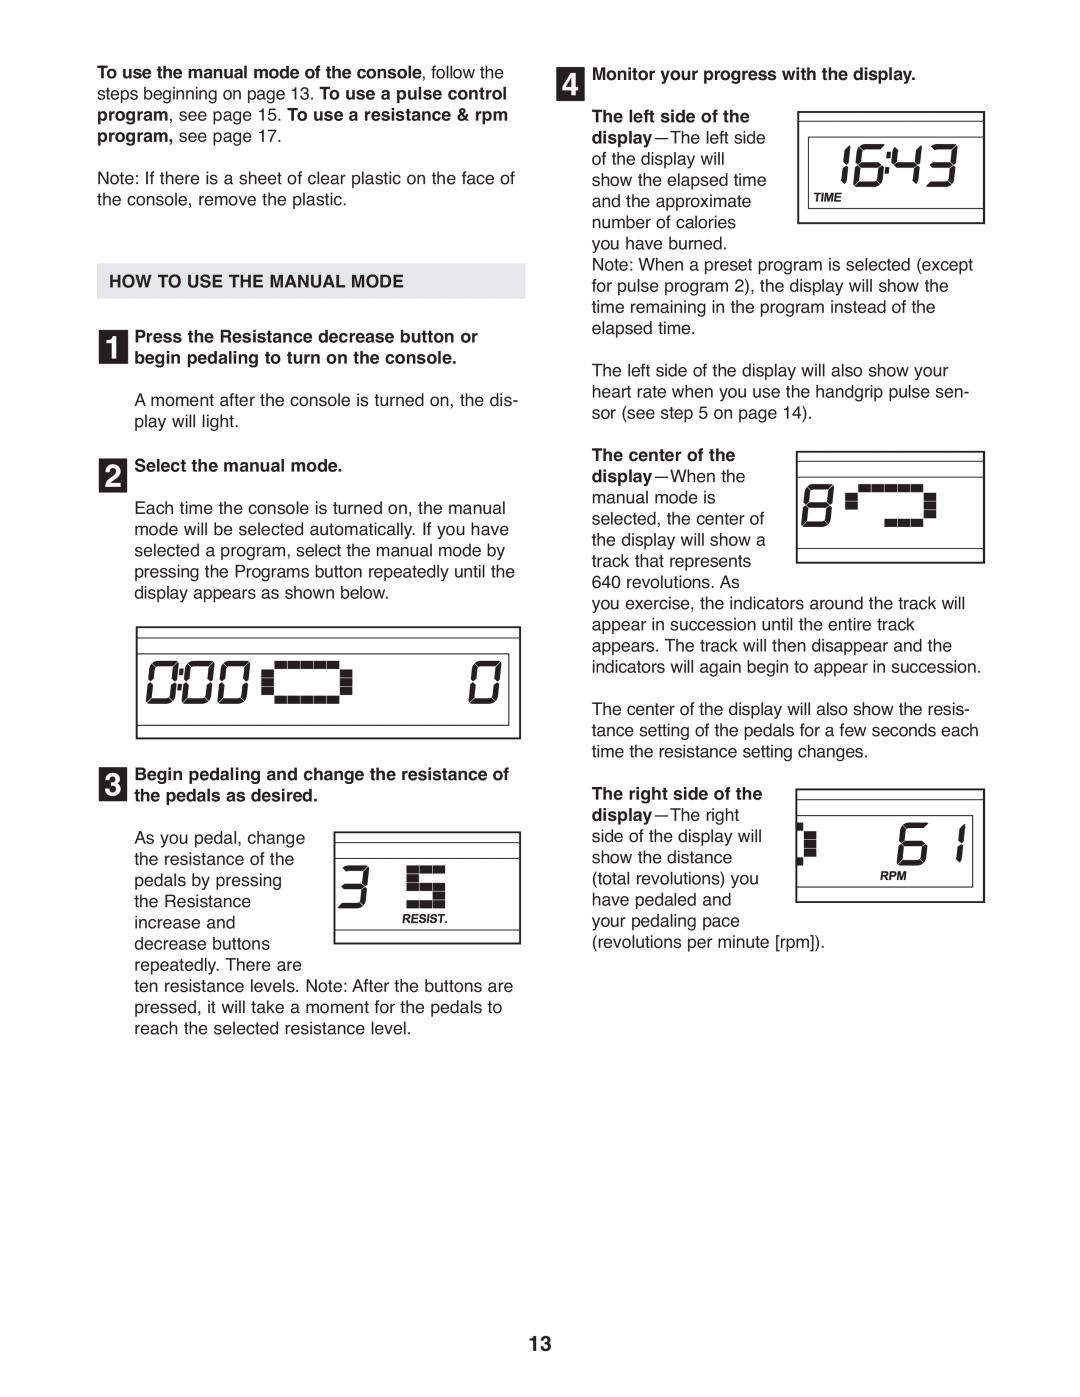 ProForm PFEL5905.0 user manual How To Use The Manual Mode, Select the manual mode 